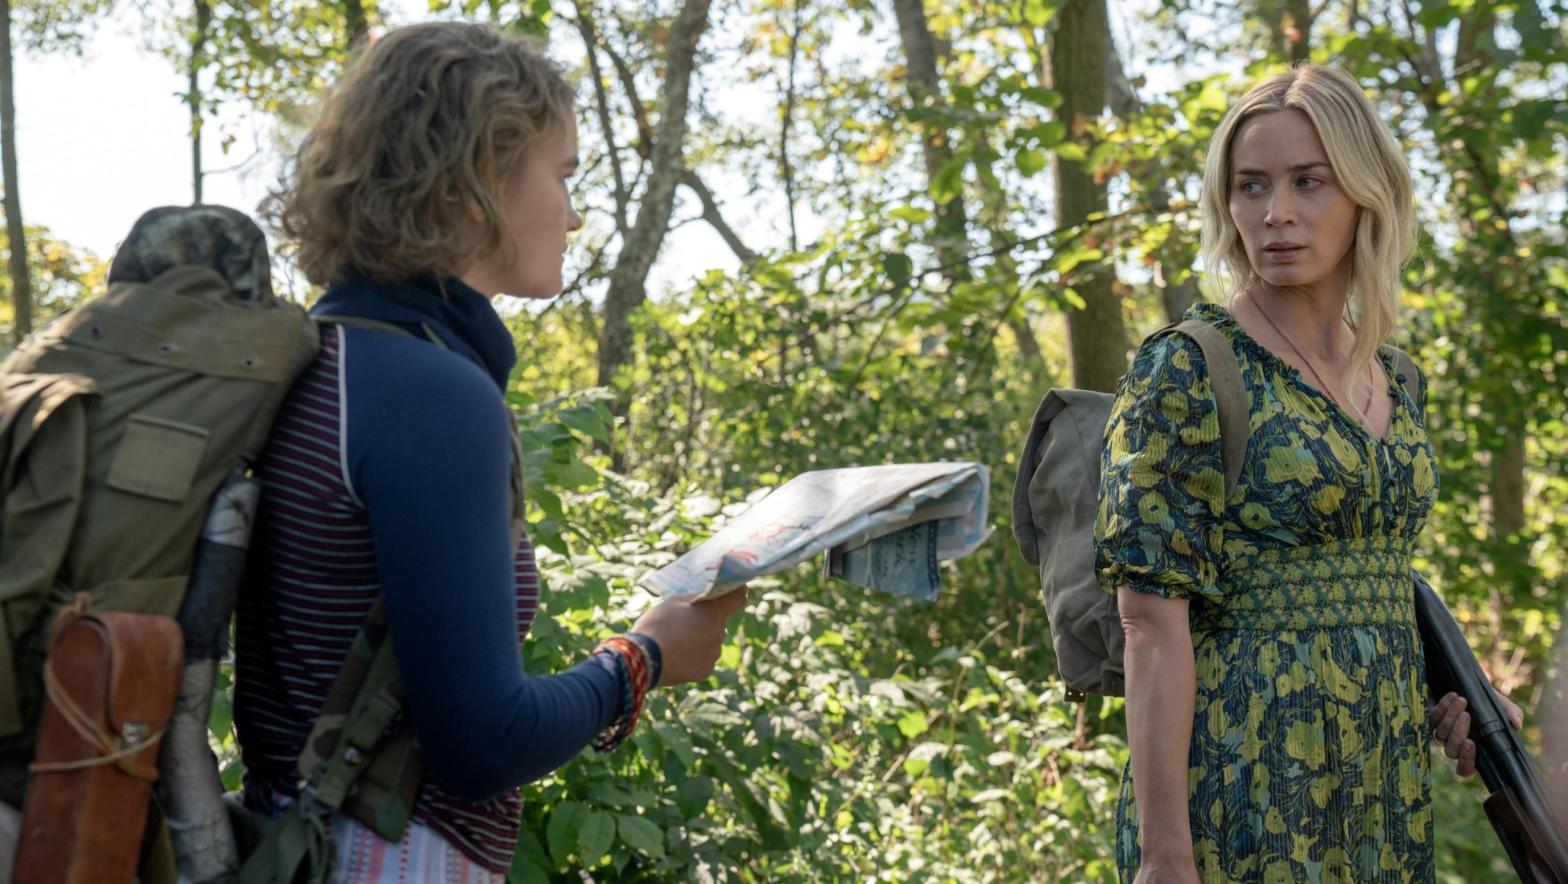 Emily Blunt and Millicent Simmonds in A Quiet Place II (Image: Paramount Pictures)